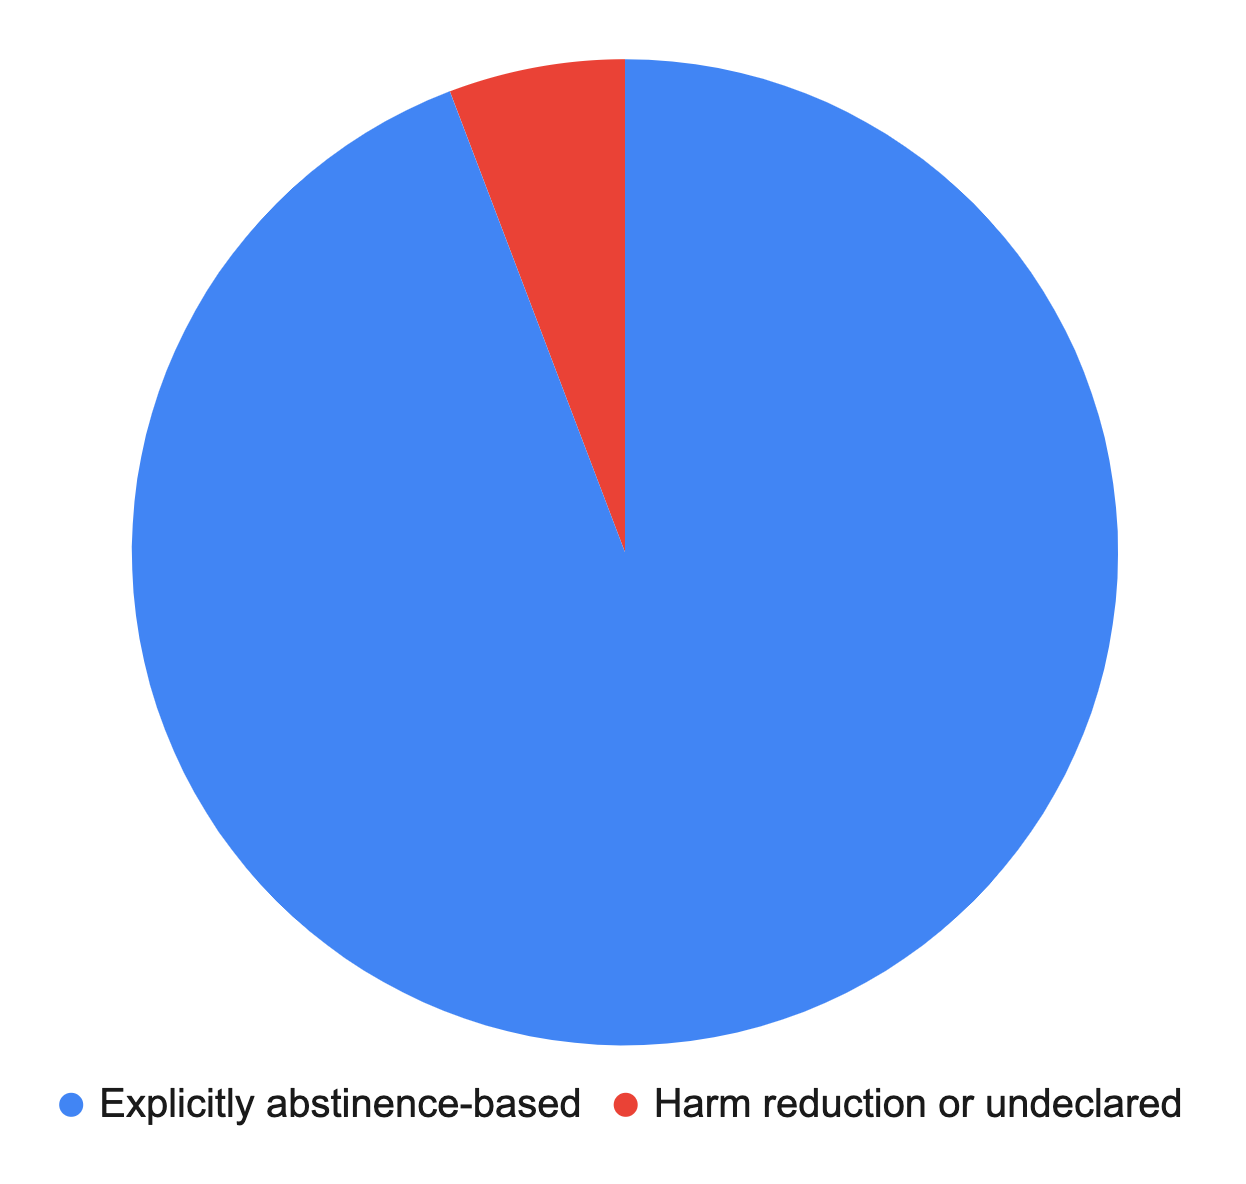 Pie chart showing that 94% of treatment beds in Alberta are in facilities that are explicitly abstinence based